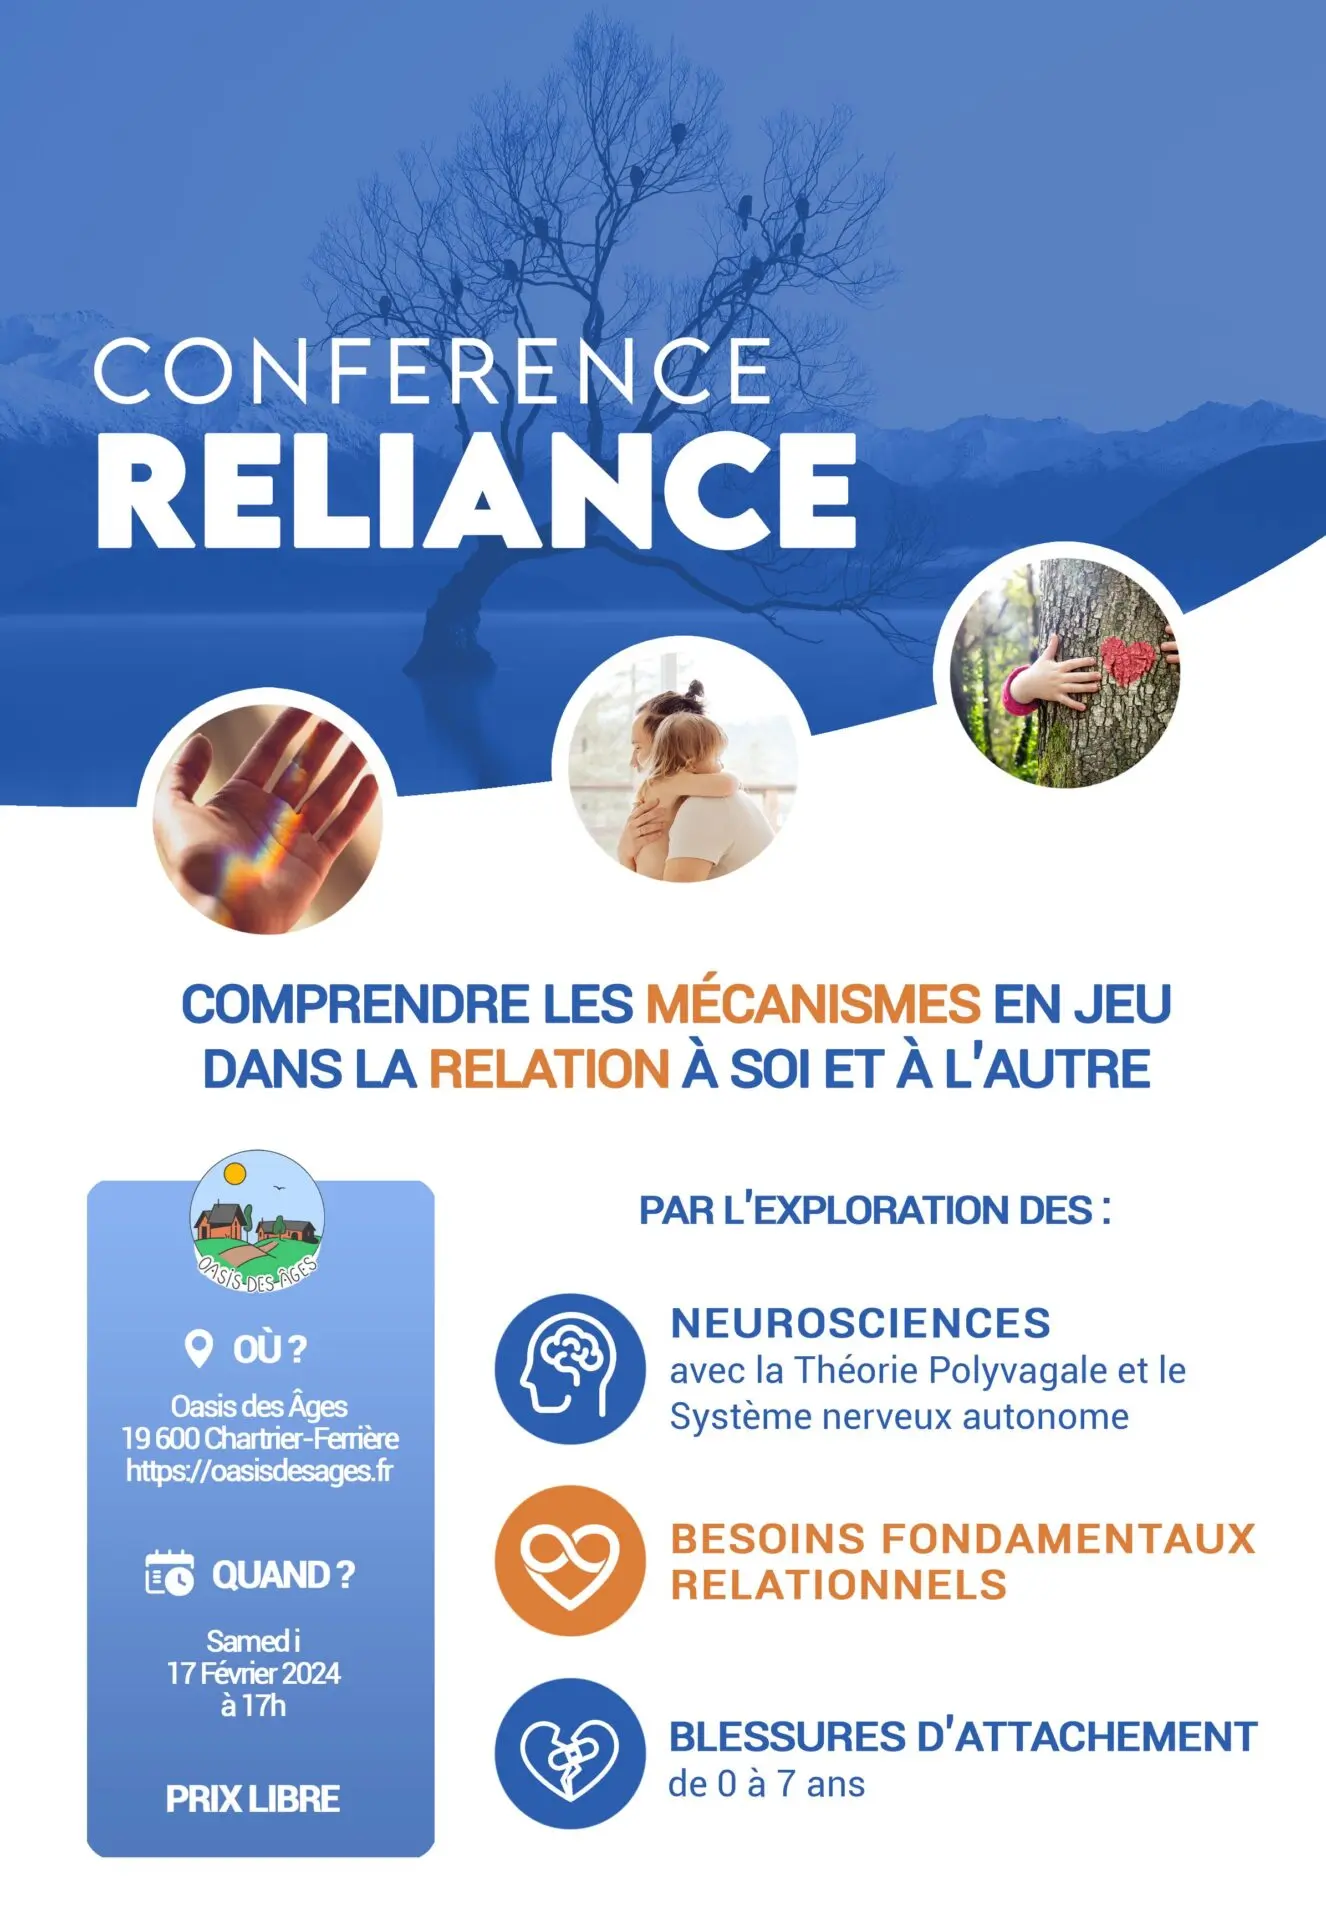 Conférence Reliance Relations Humaines Gwendavyre Delaide